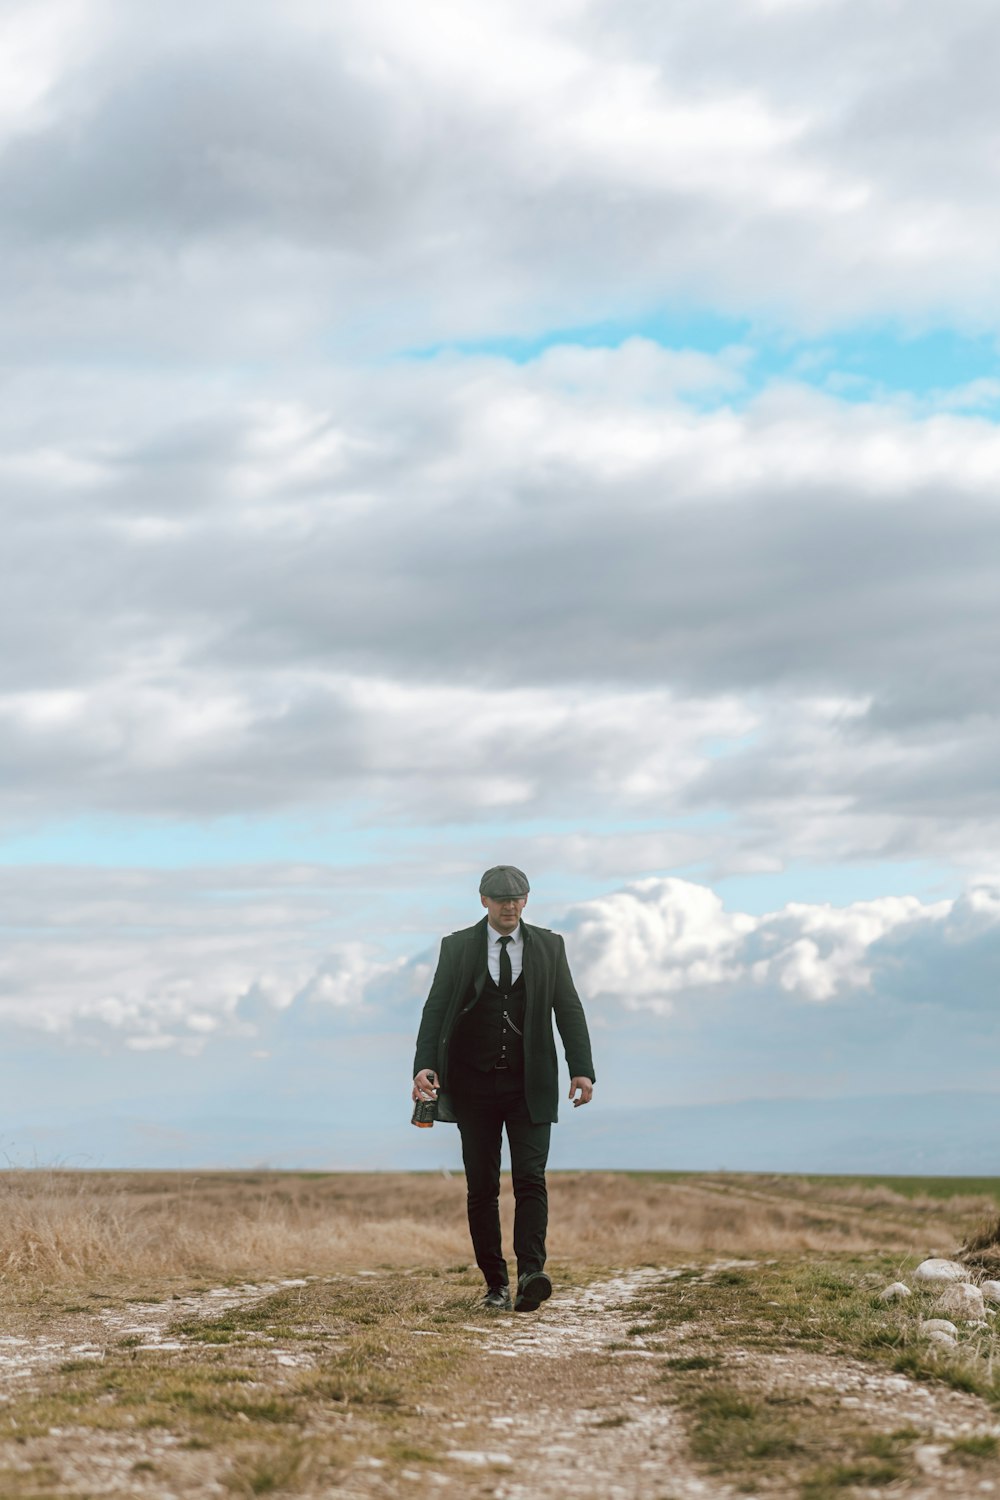 a man in a suit and tie walking across a field